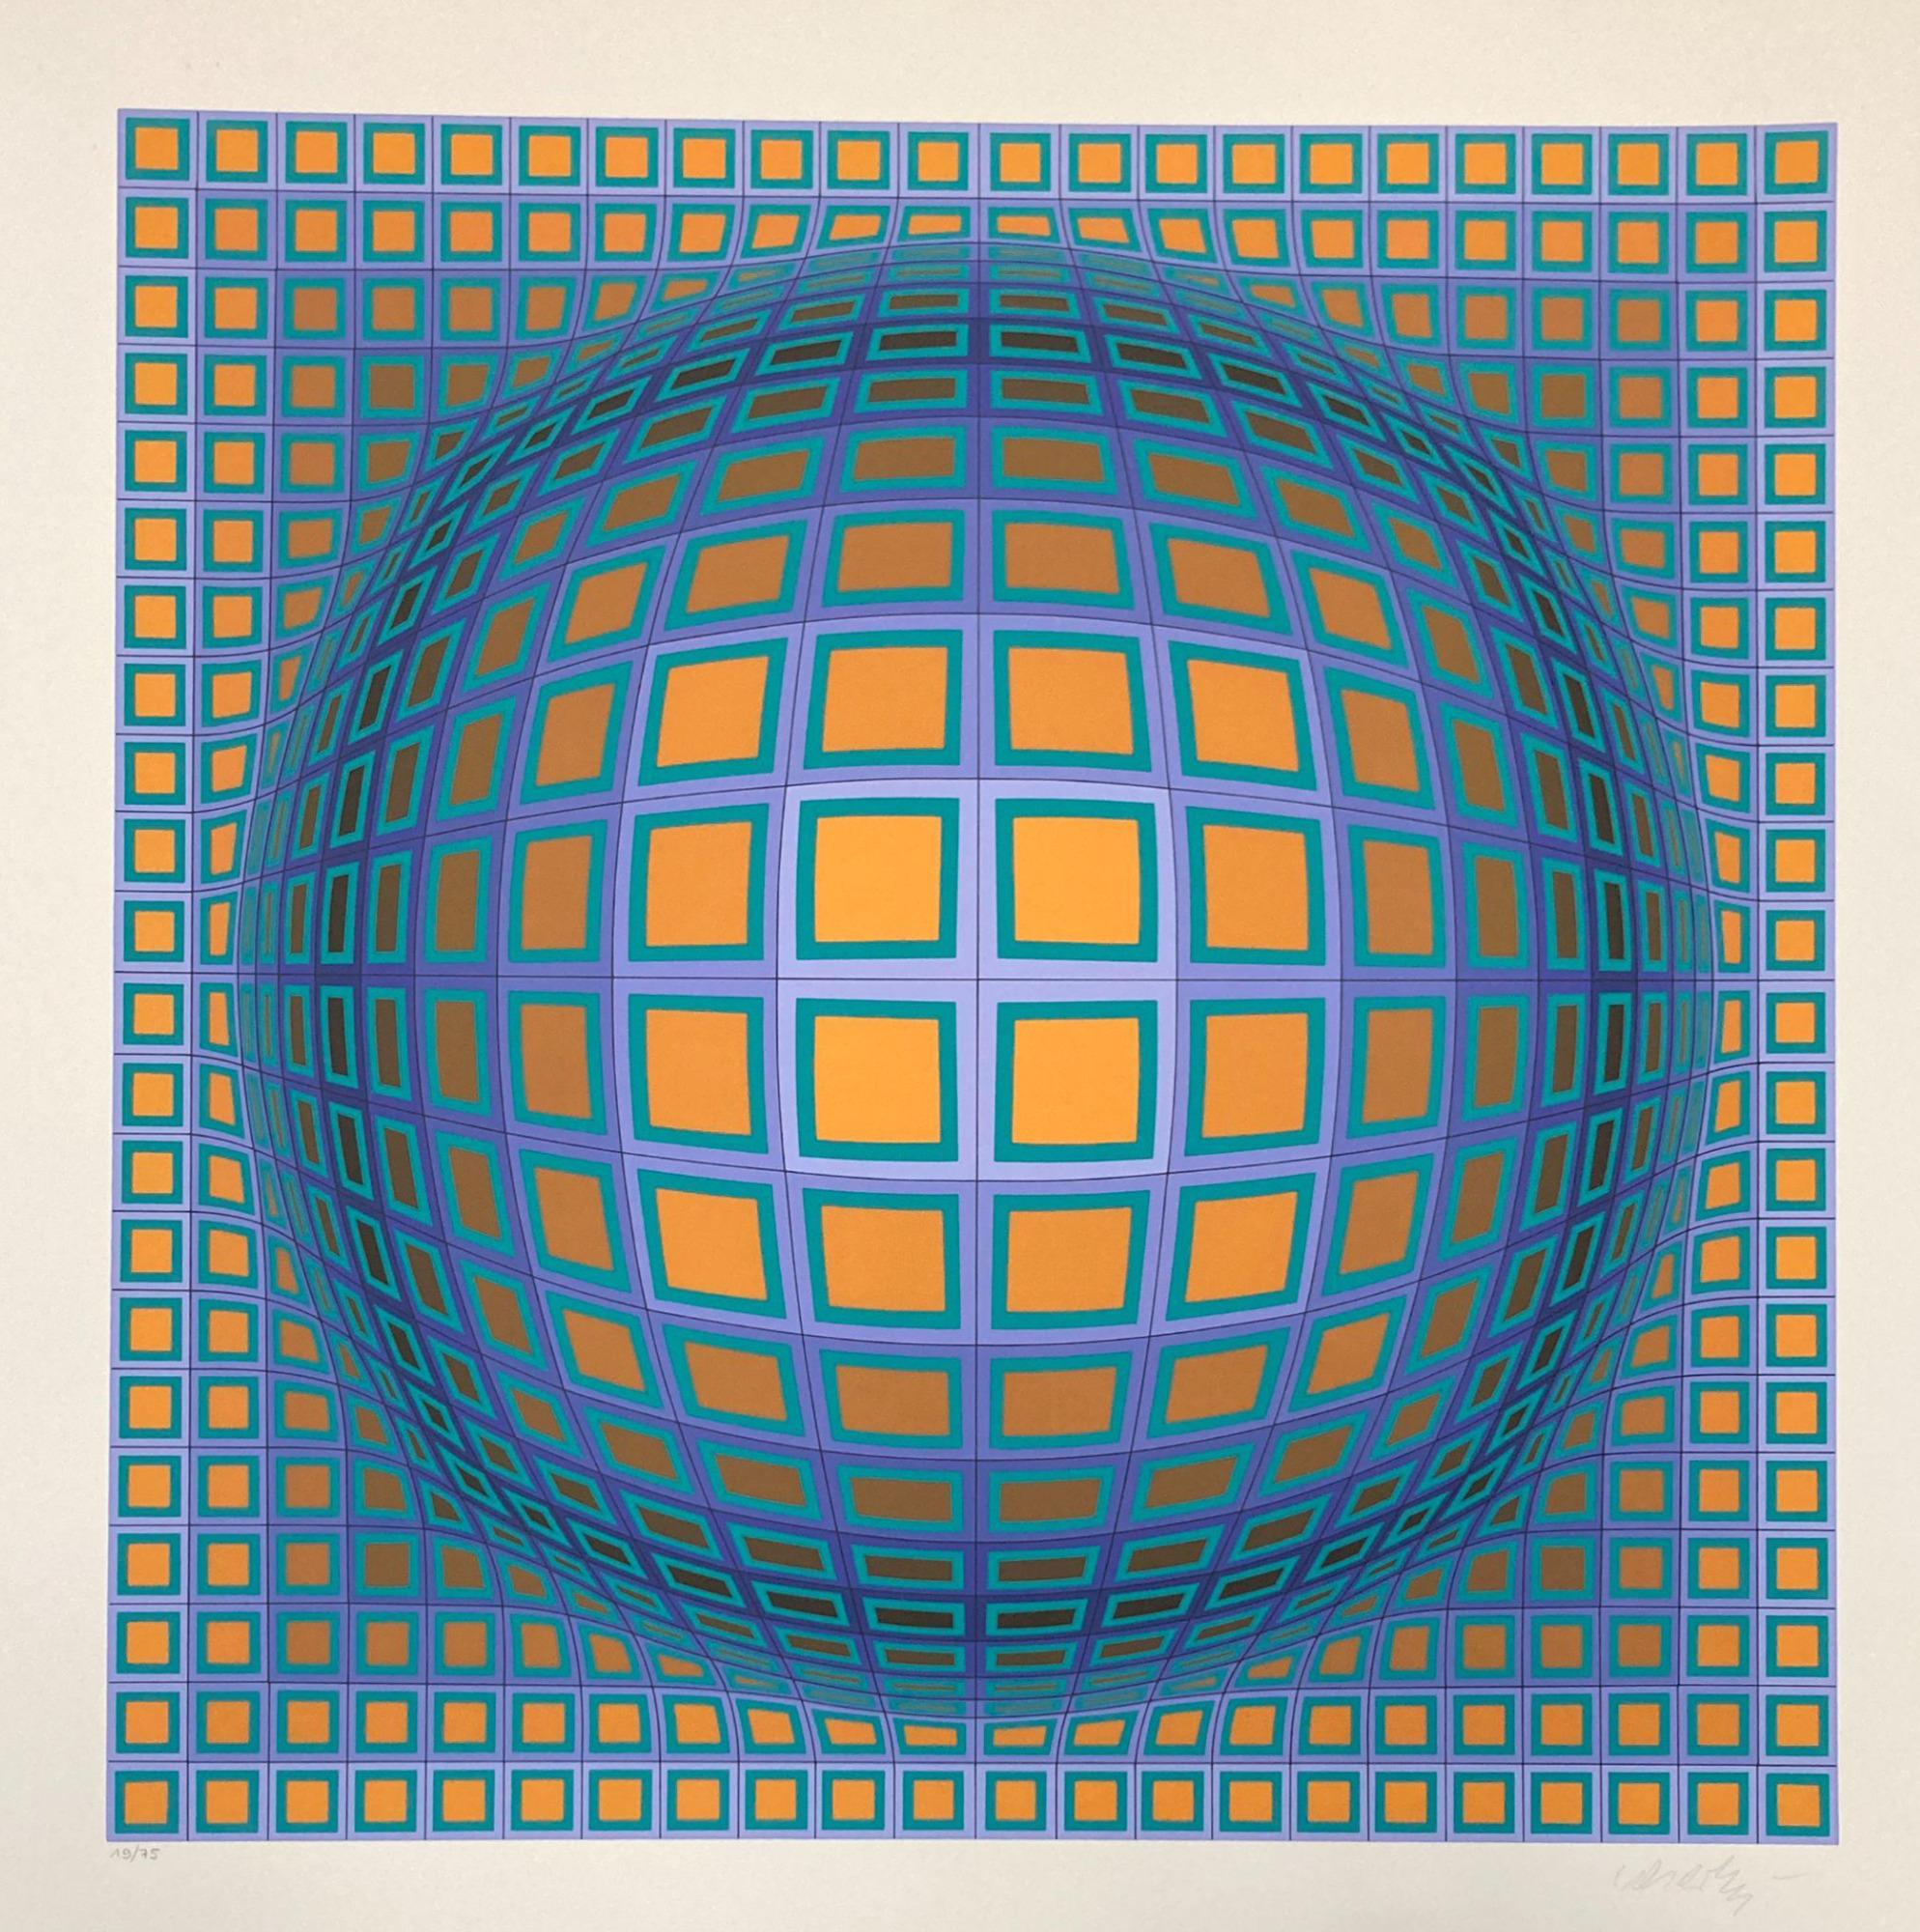 Domb-B (from Vancouver) - Print by Victor Vasarely